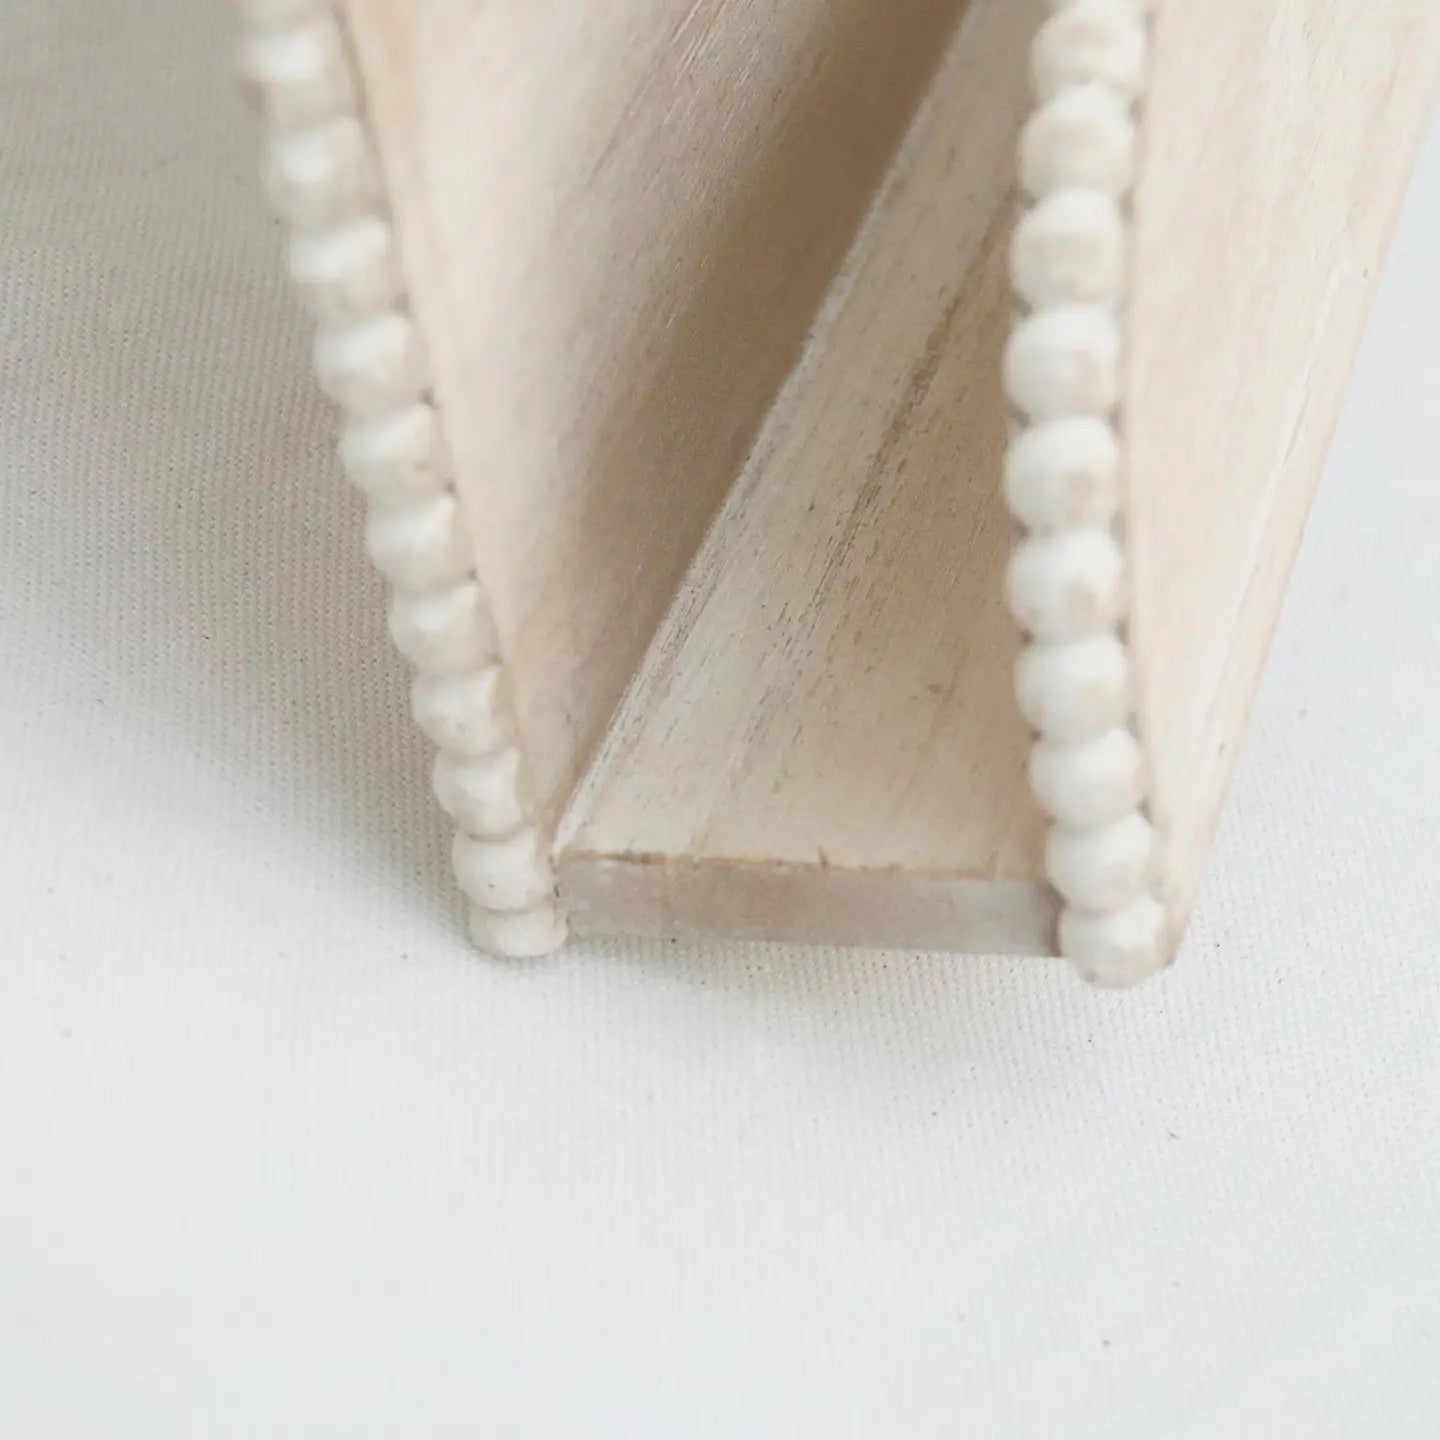 Cookbook Stand with Beads Edge